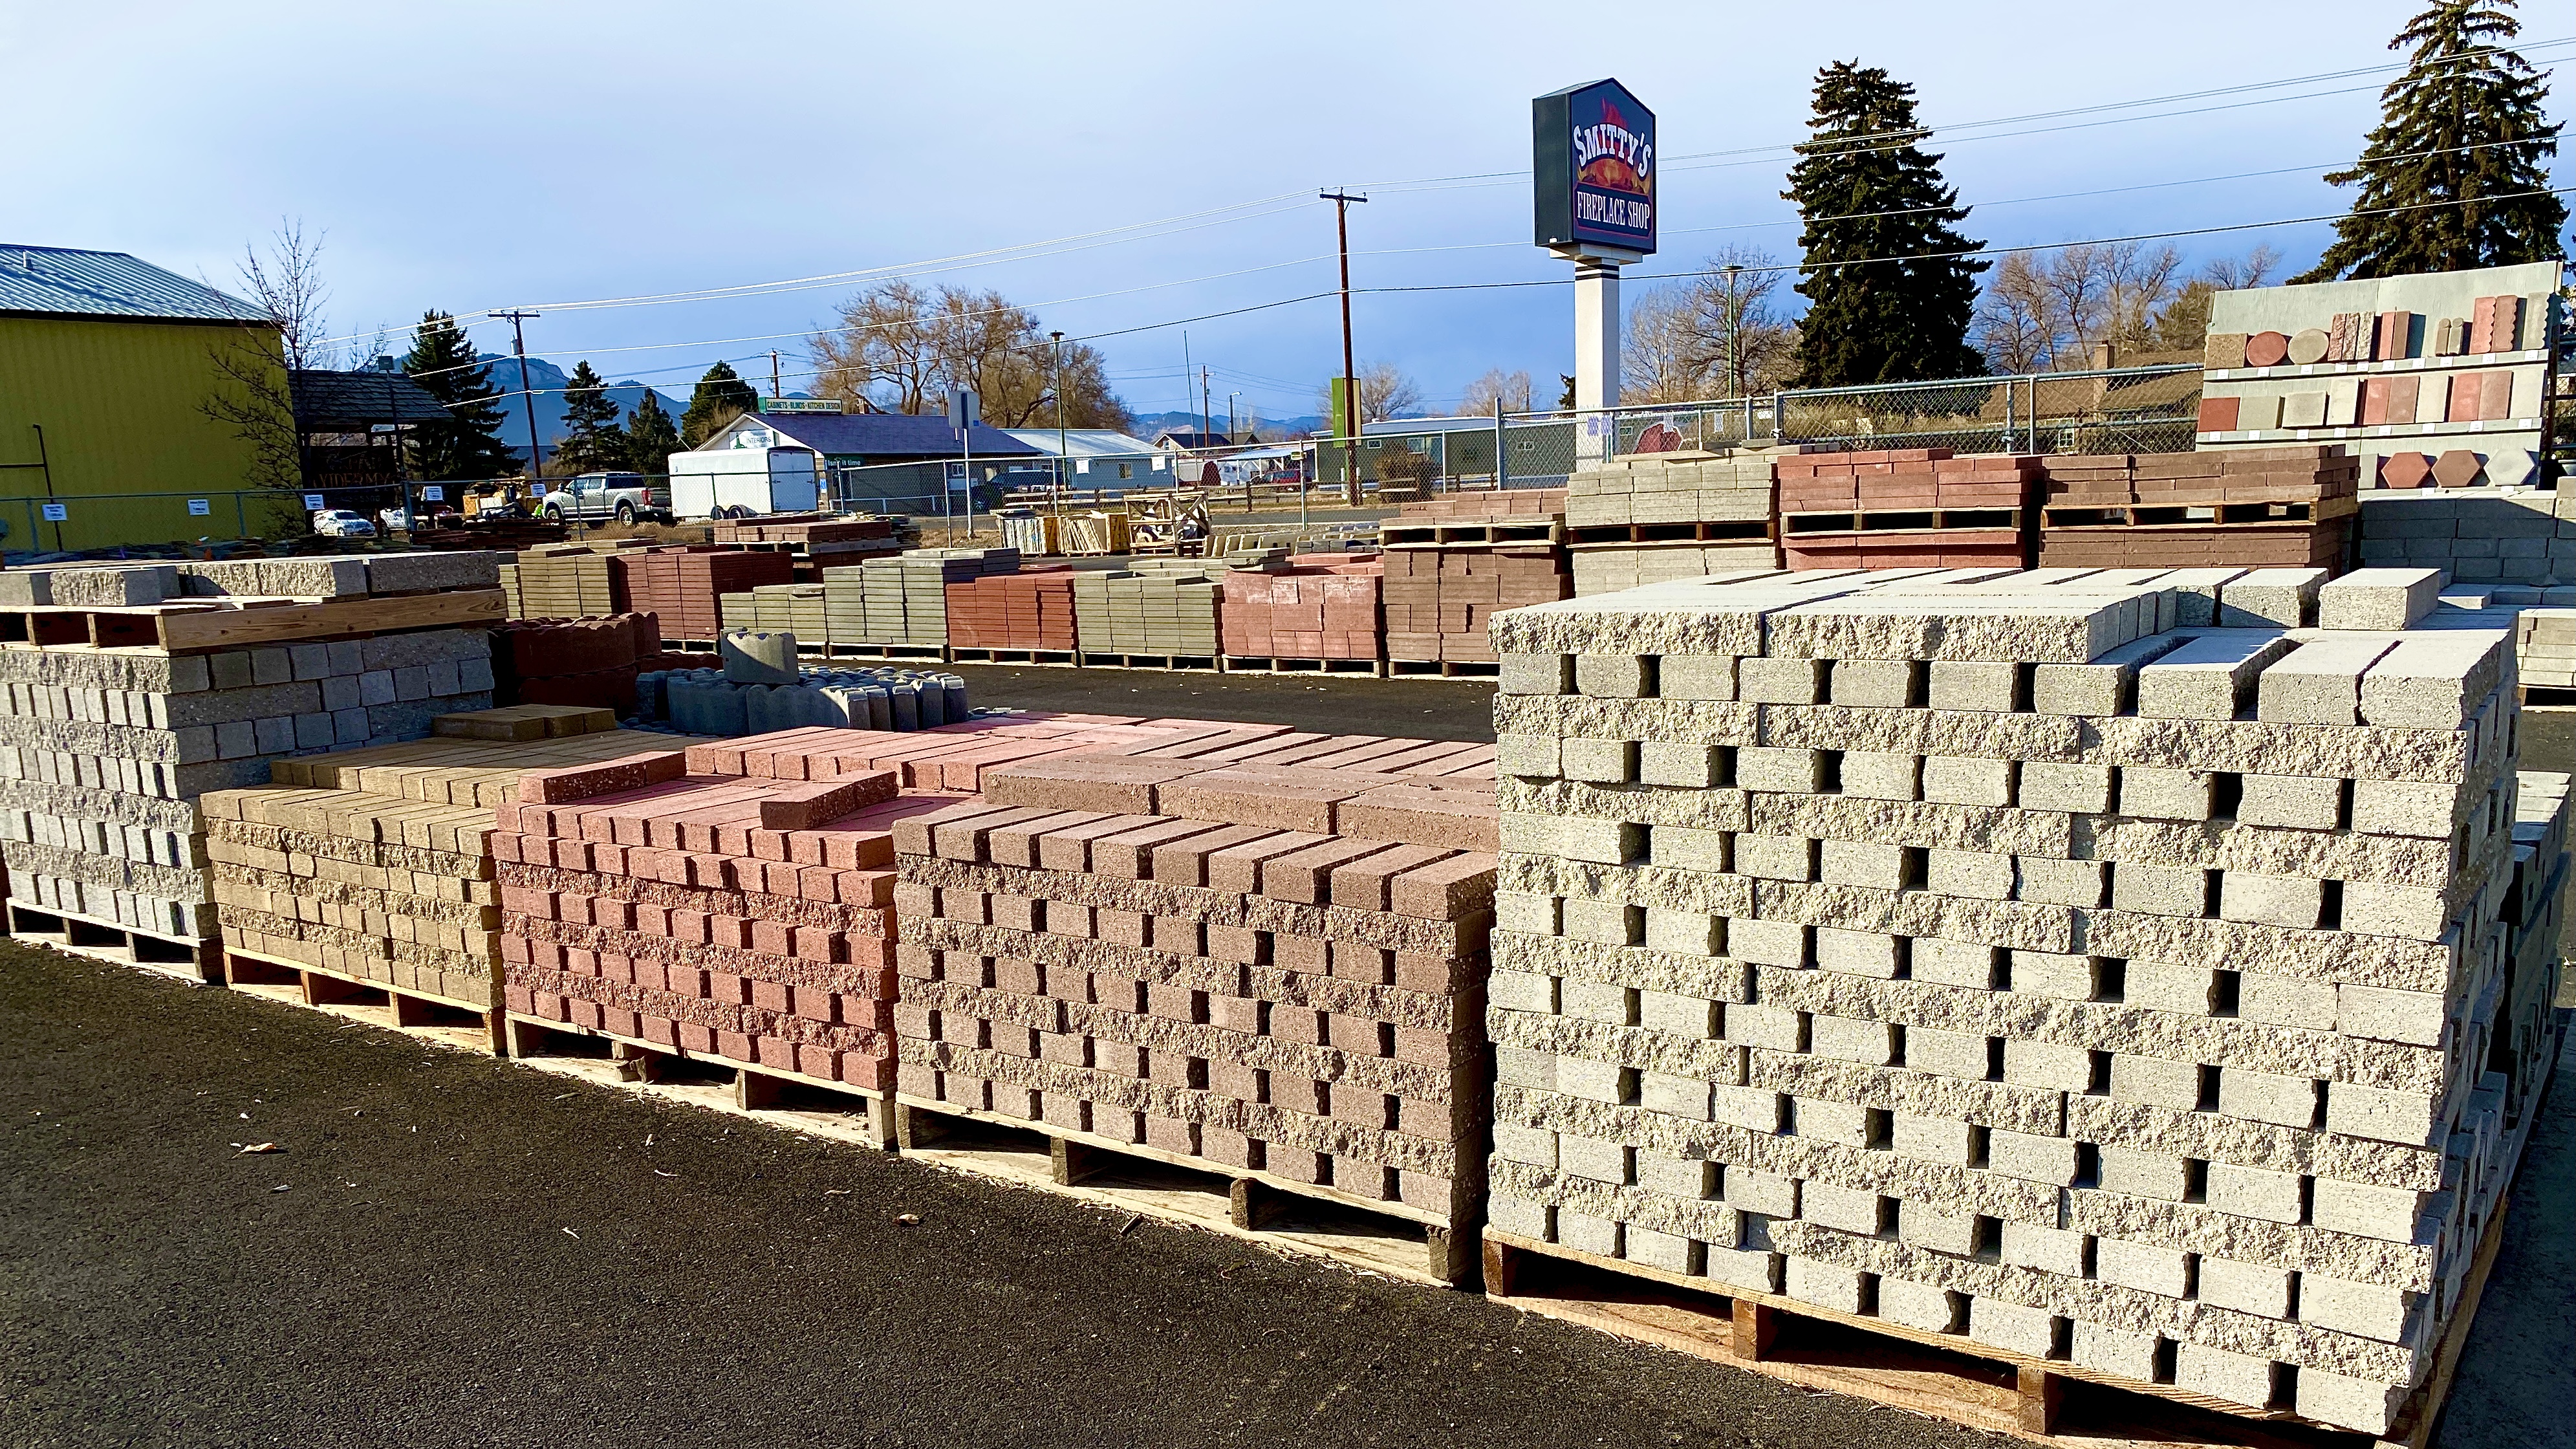 Stacks of masonry and landscaping cinder blocks stacked in a paved, fenced yard. Sign that says Smitty's Fireplace Shop in the background.